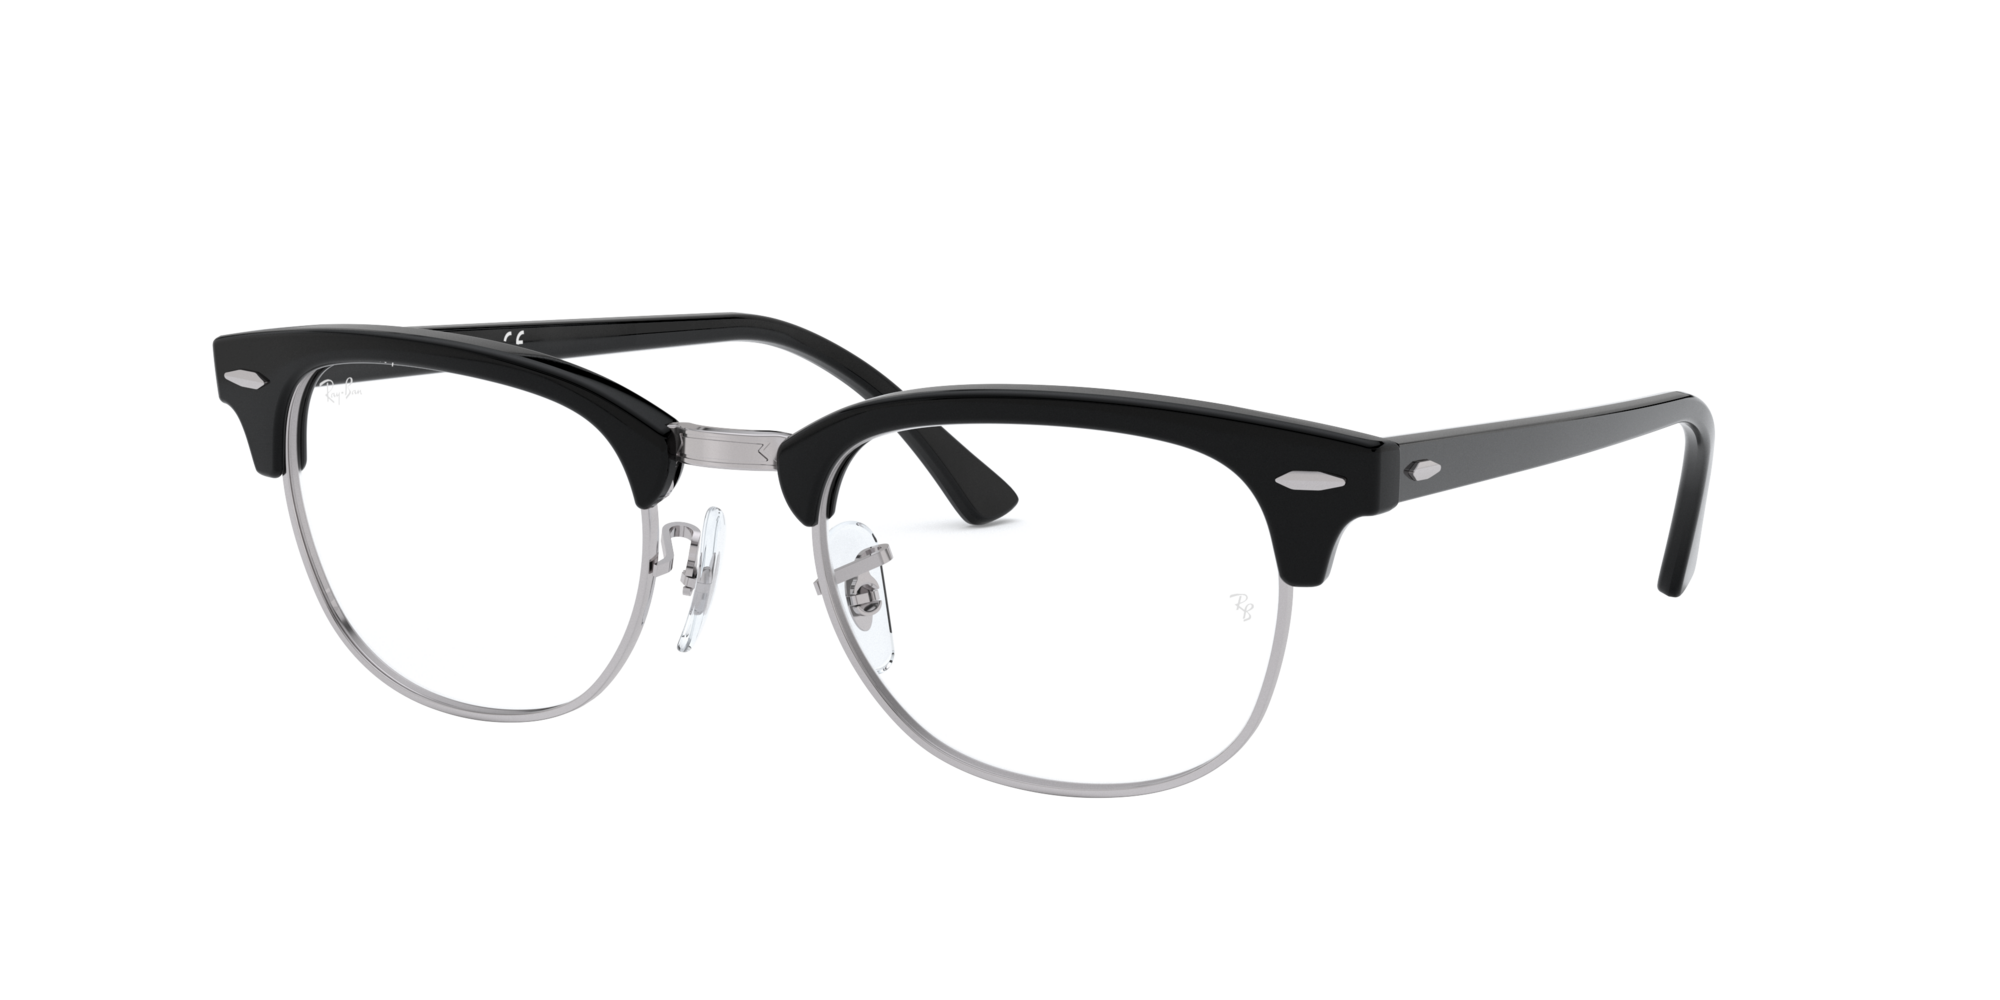 Ray Ban 0rx5154 Glasses In Black Target Optical